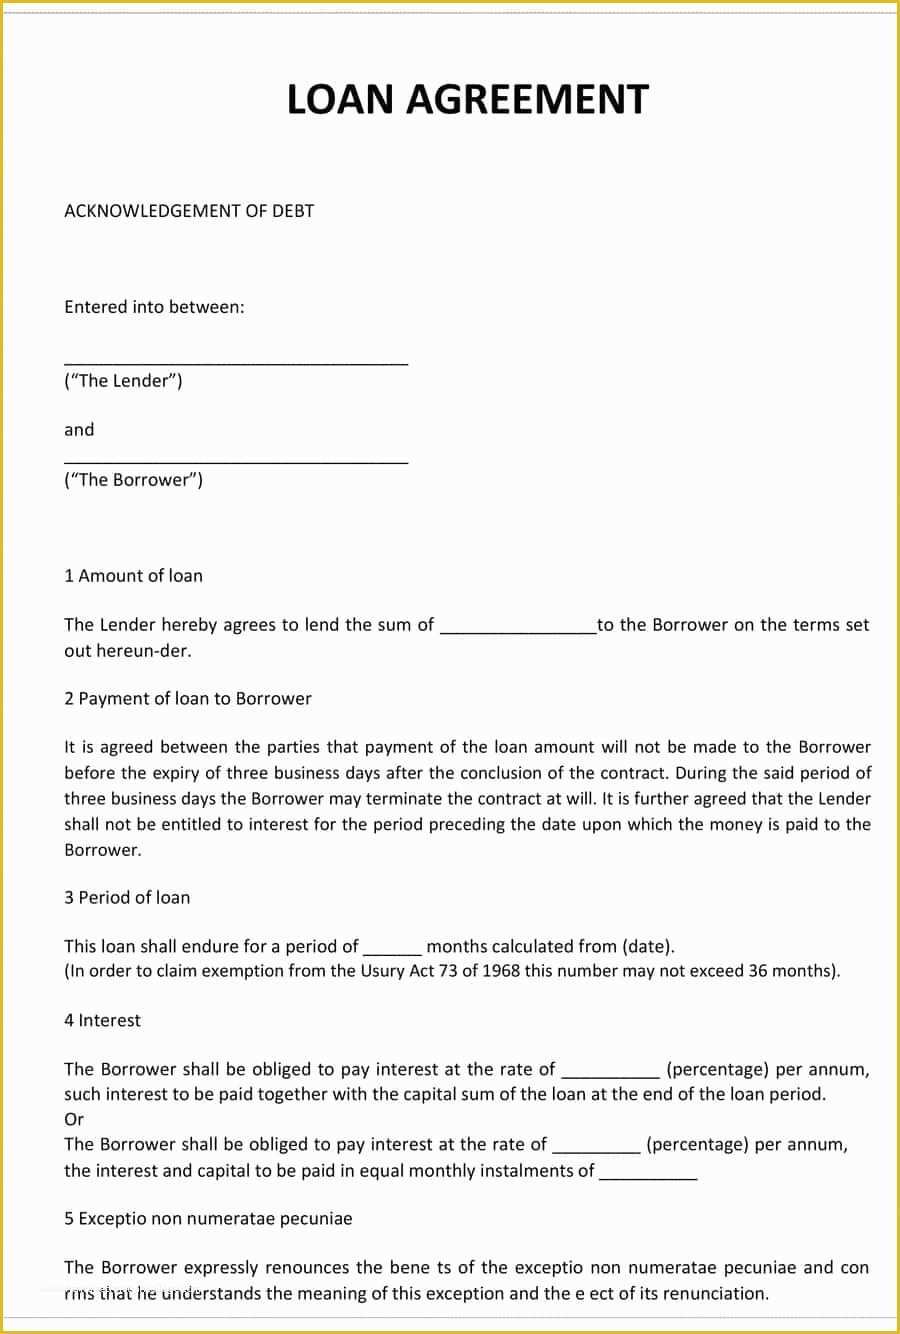 Free Online Loan Agreement Template Of 40 Free Loan Agreement Templates [word &amp; Pdf] Template Lab